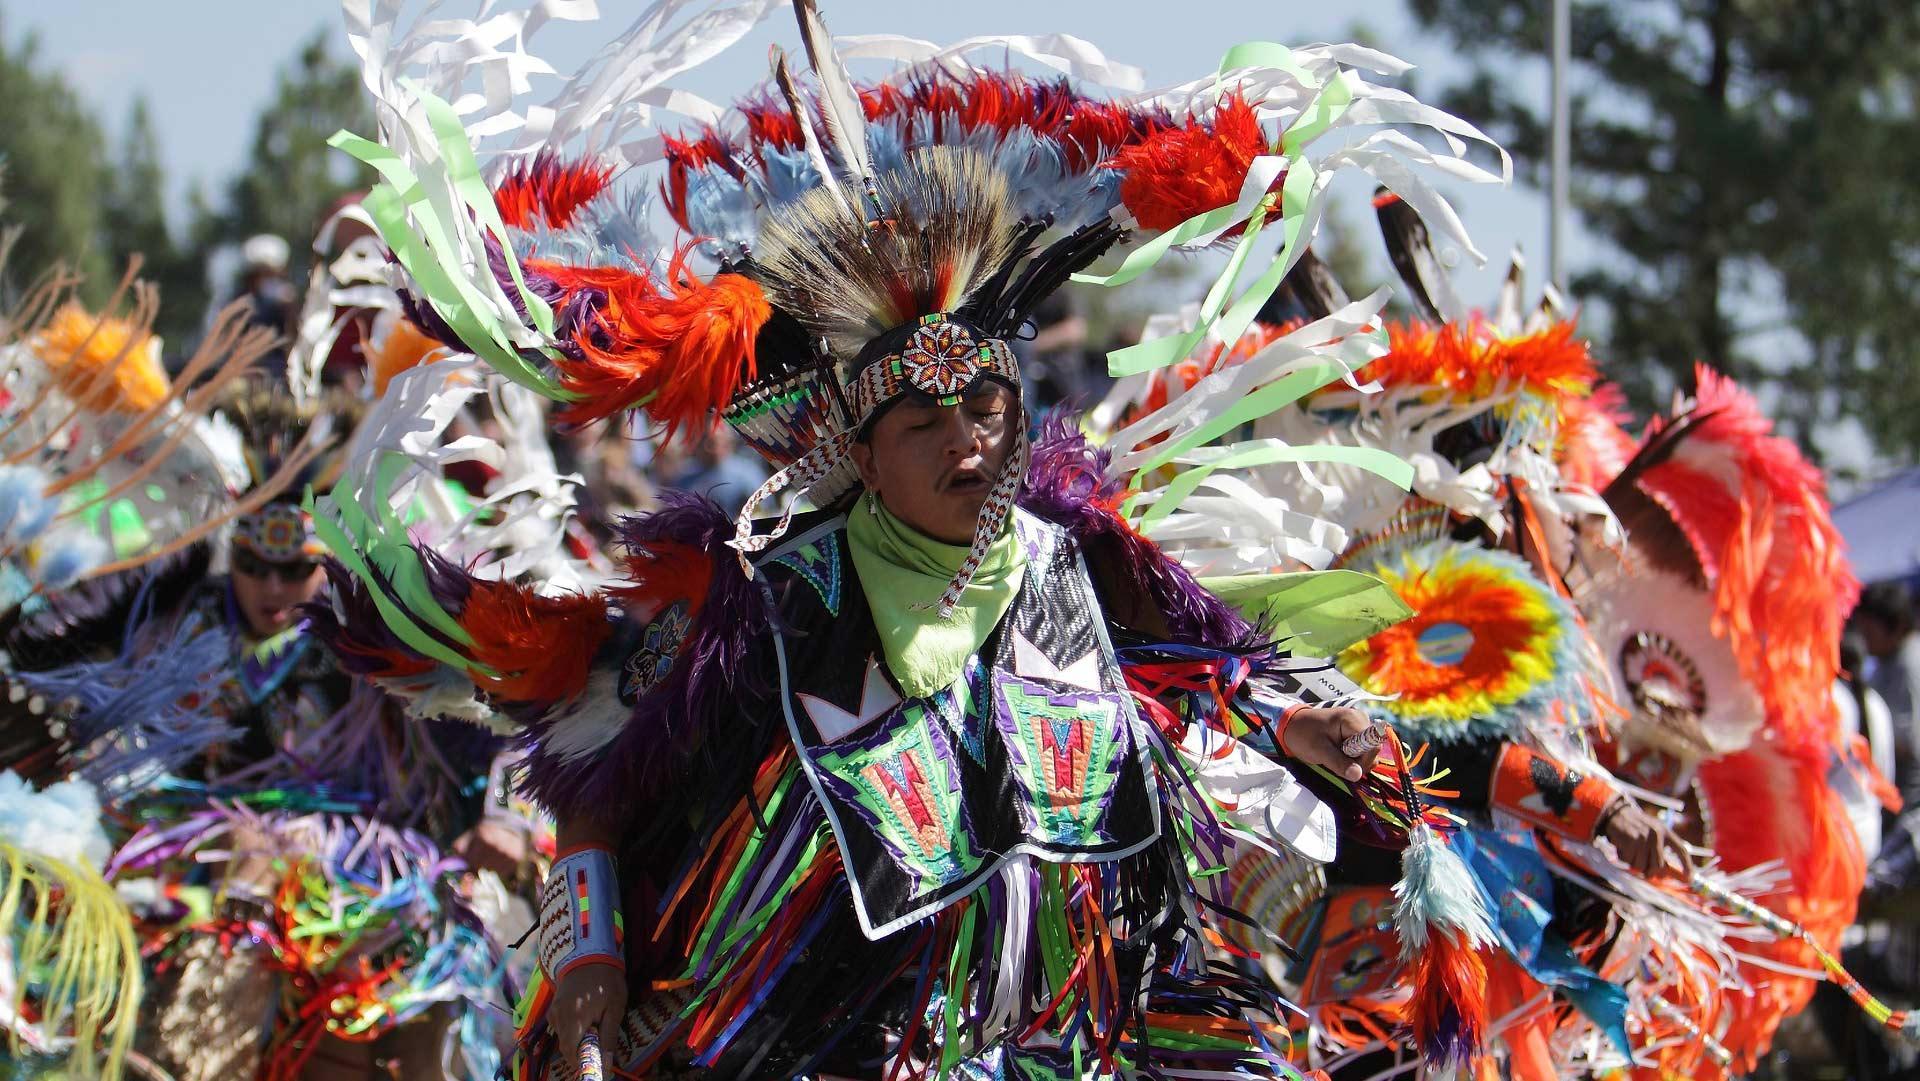 A man dancing in a full Sioux tribal outfit.